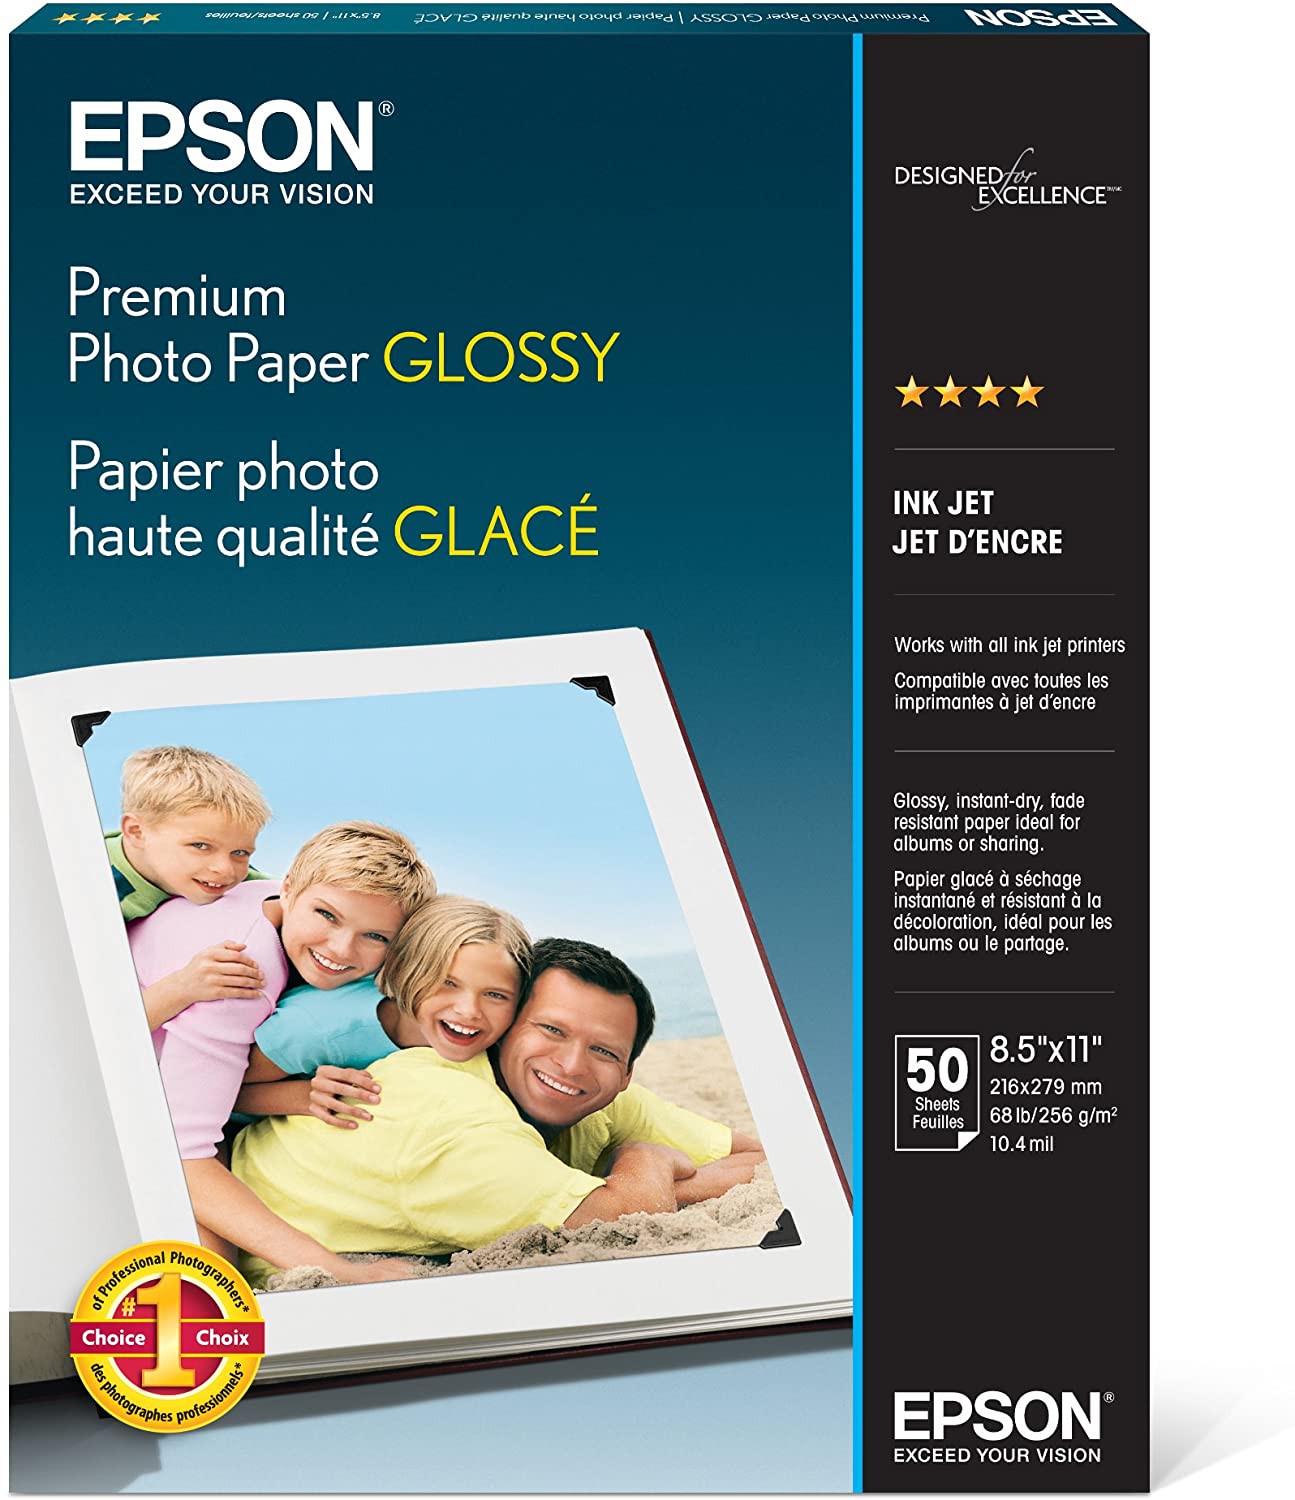  HP Matte Photo Paper, 4x6 in, 25 sheets (6QH46A